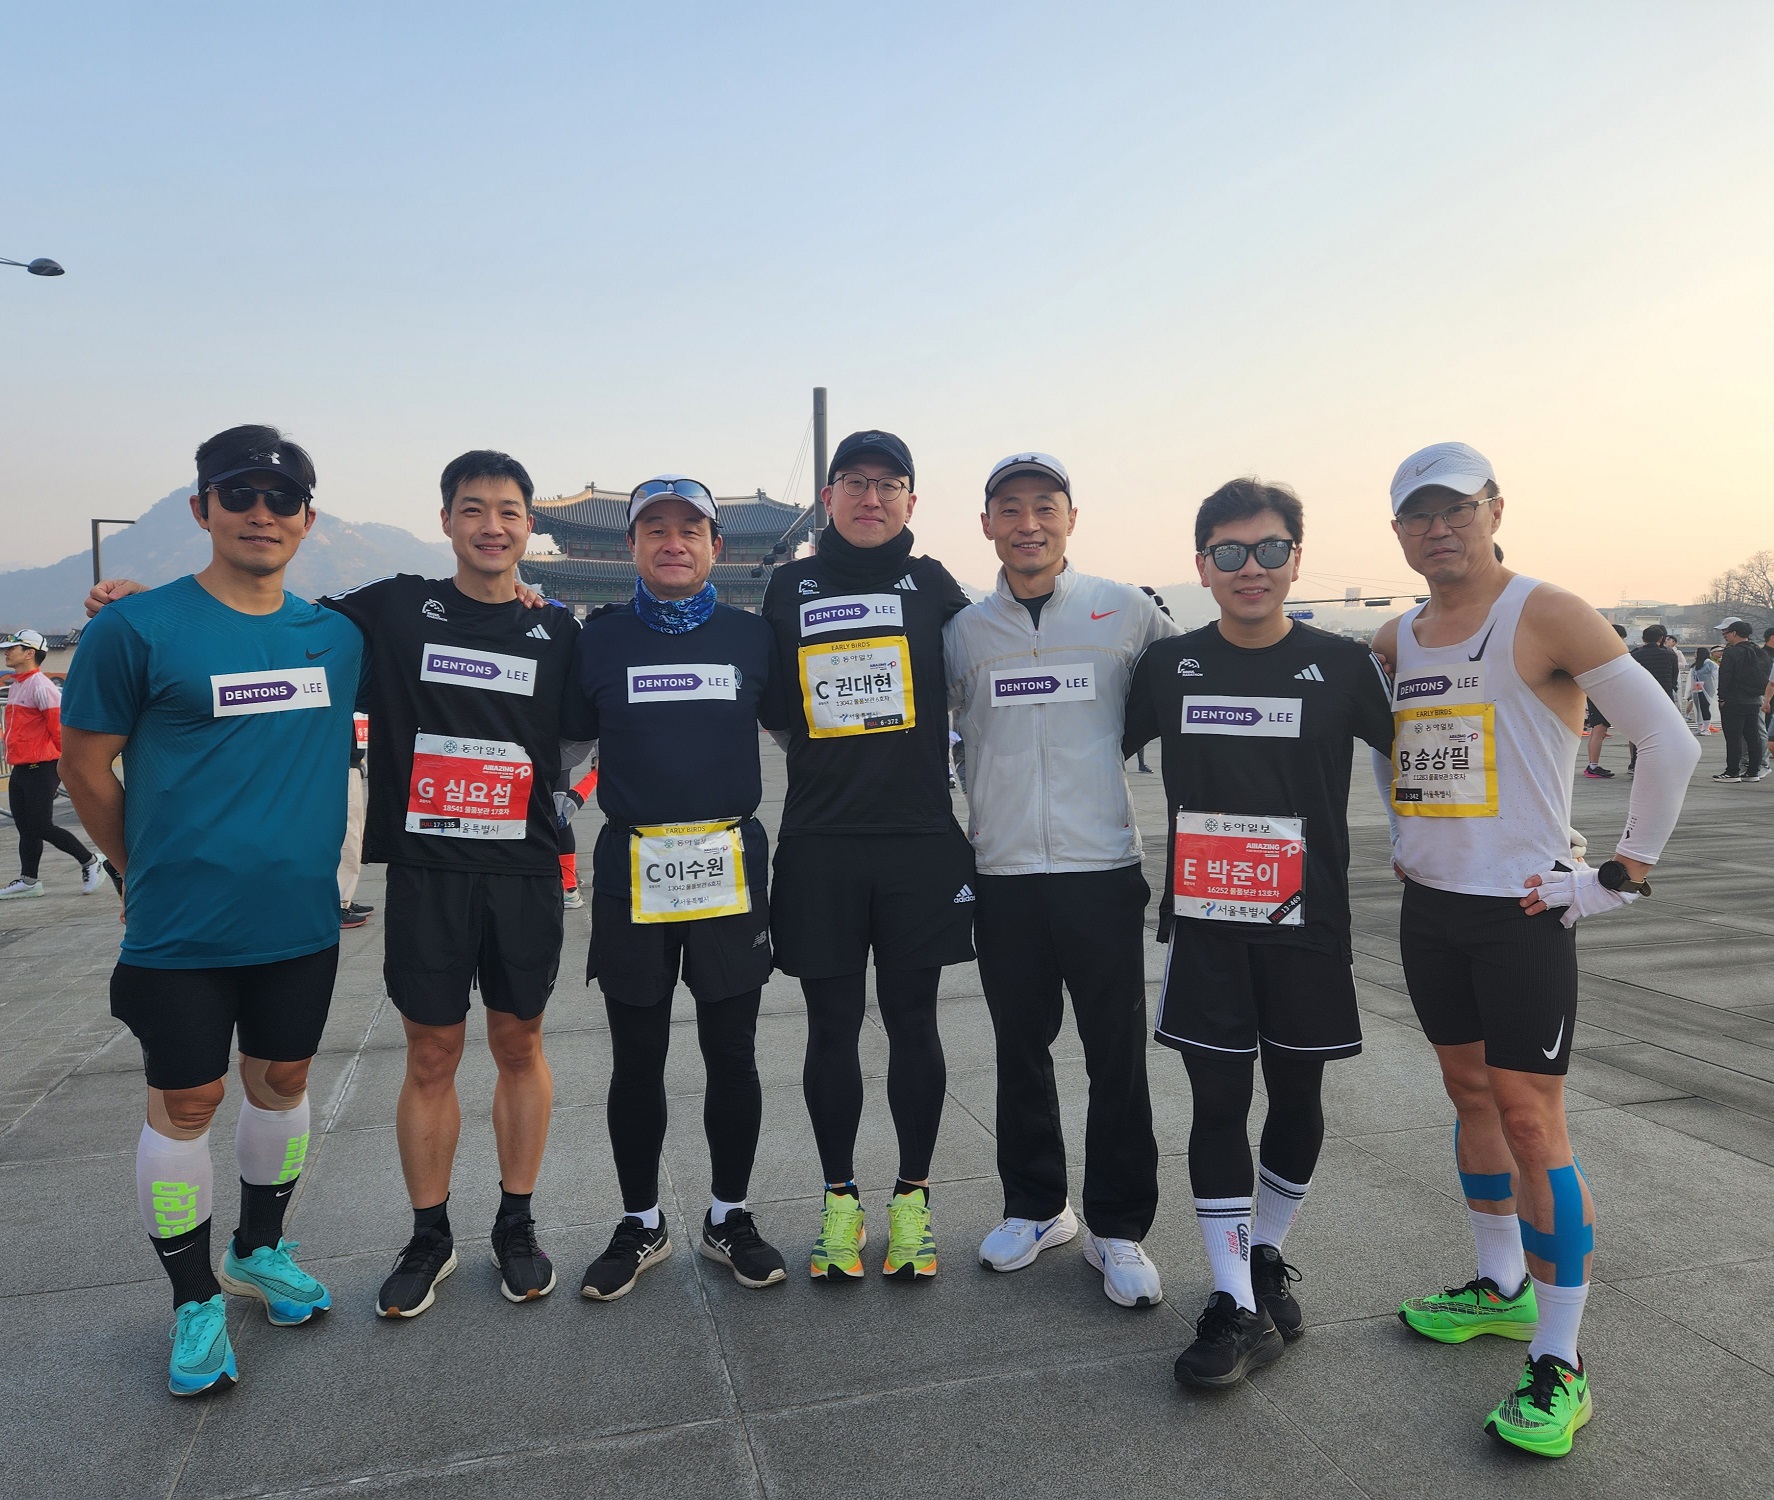 Seven members of Dentons Lee posed for photo during marathon course